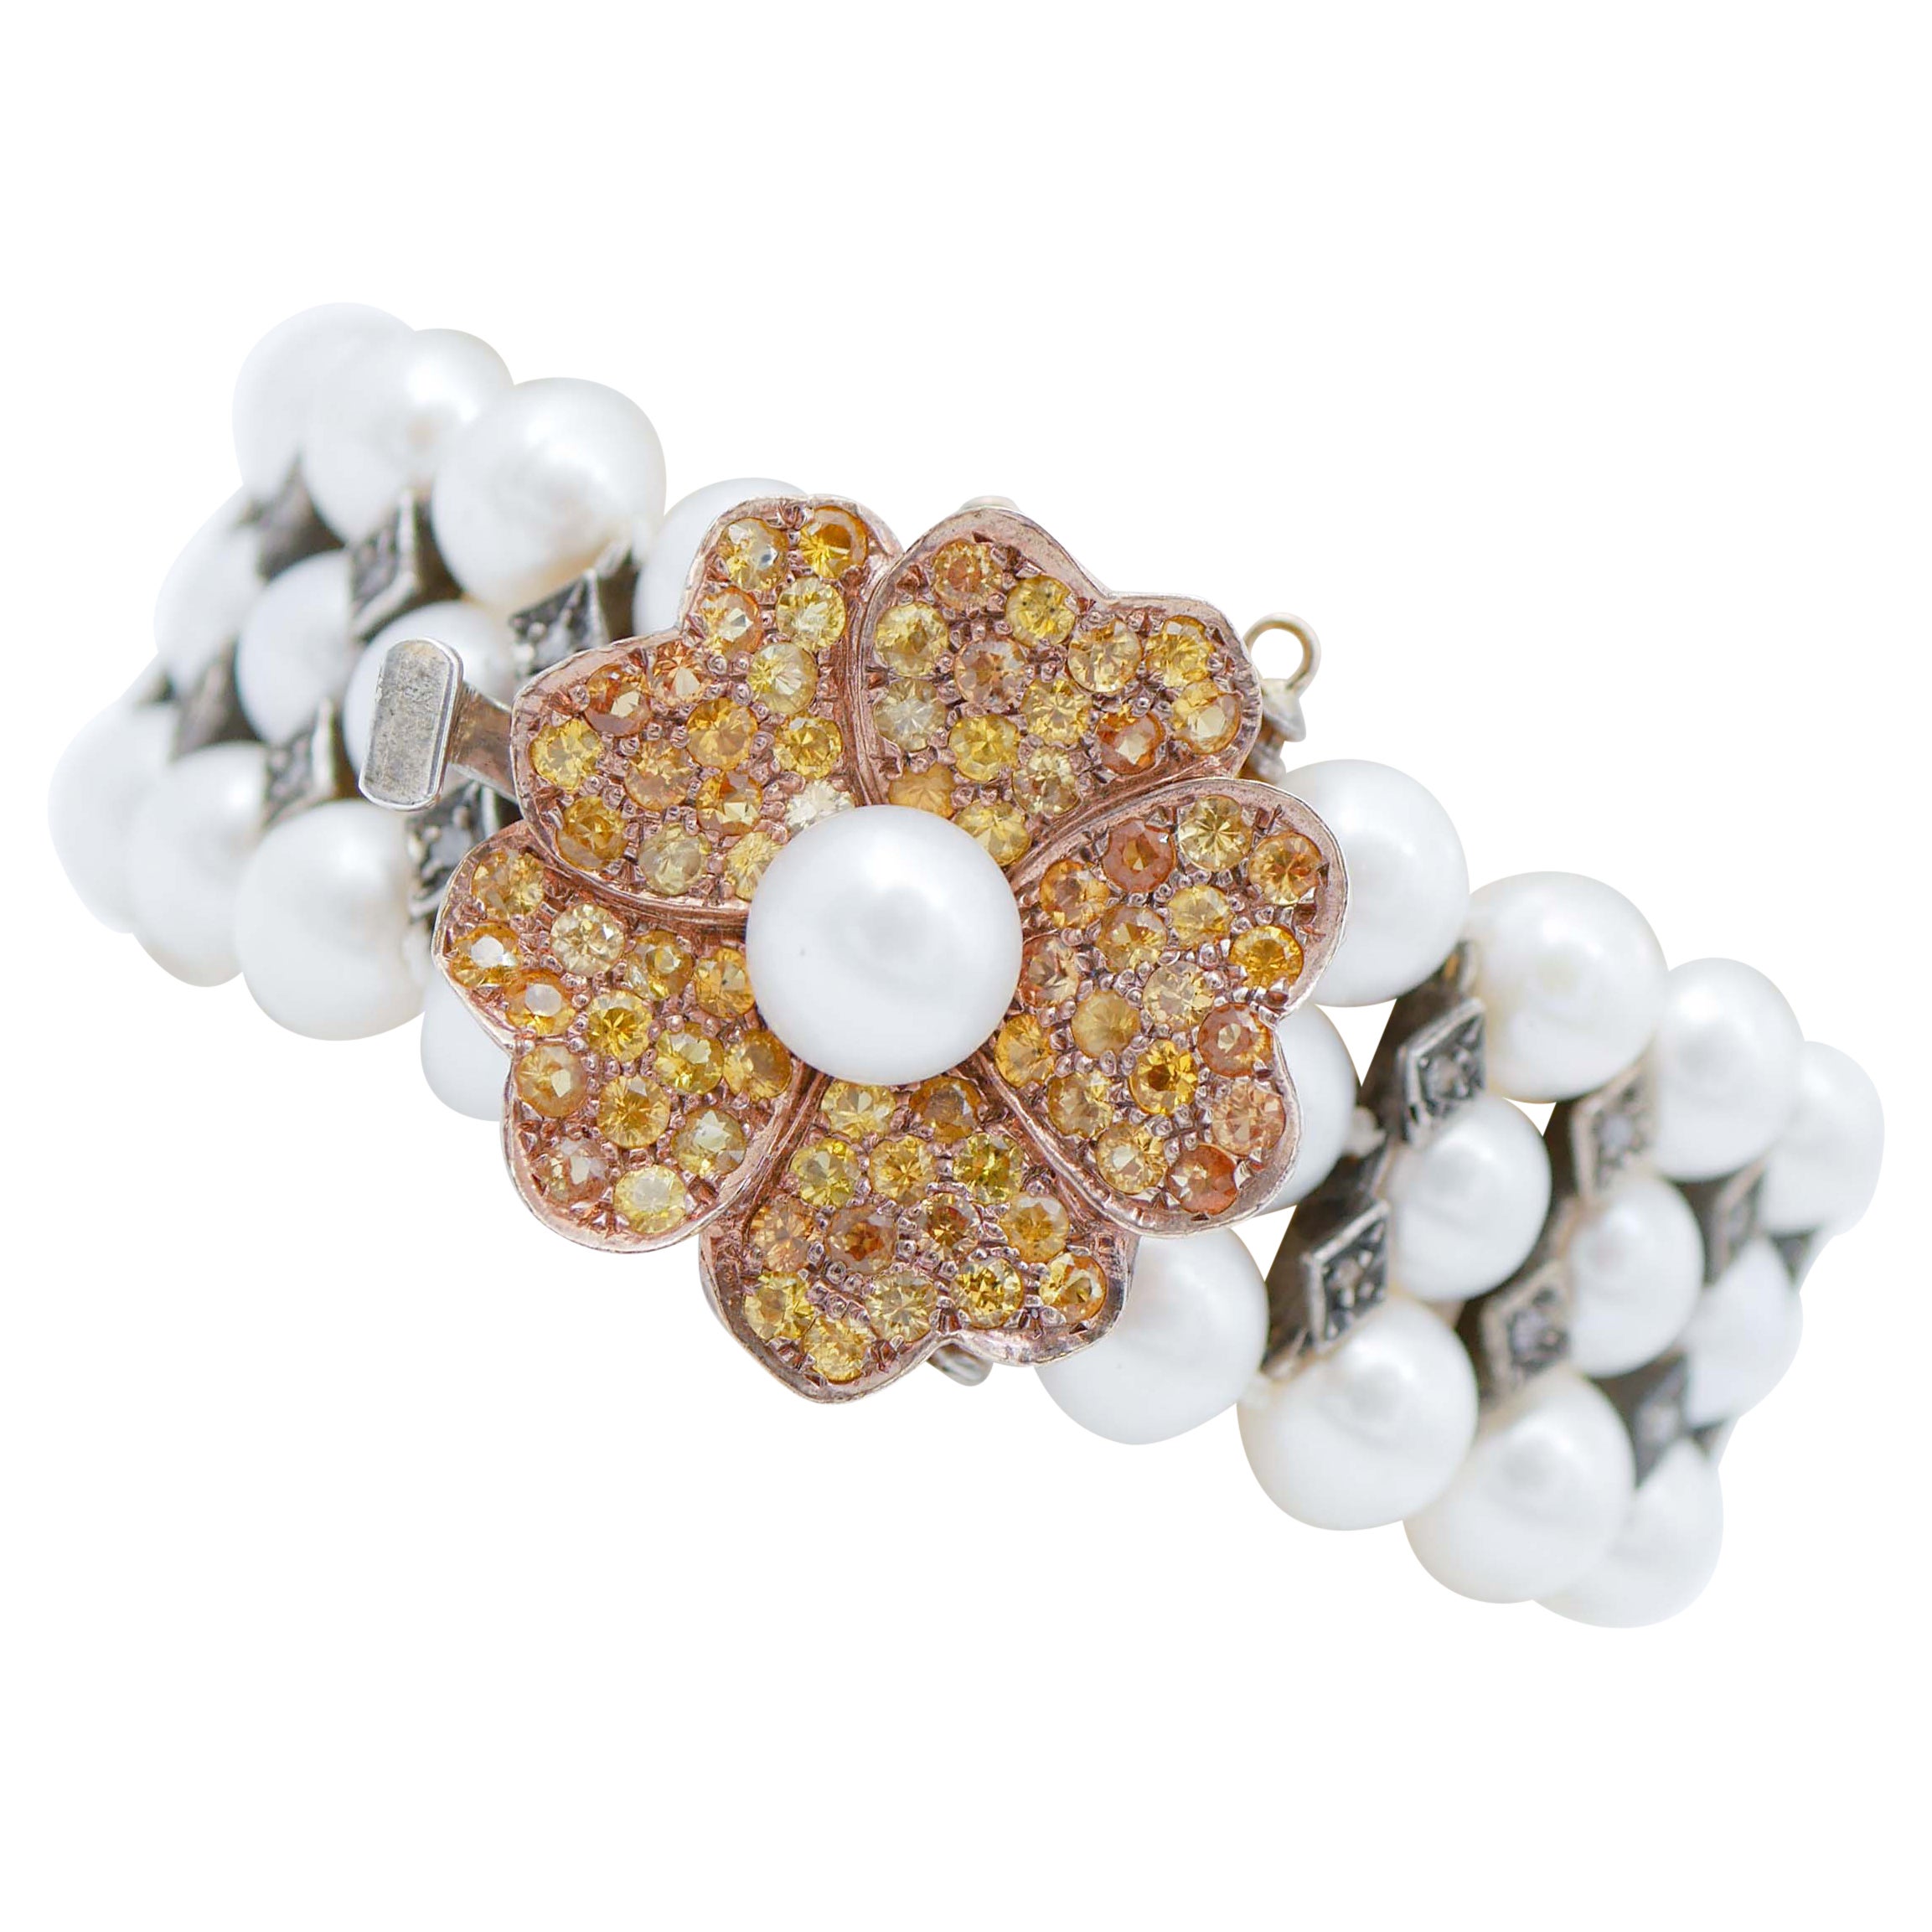 Pearls, Yellow Sapphires, Diamonds, Rose Gold and Silver Bracelet